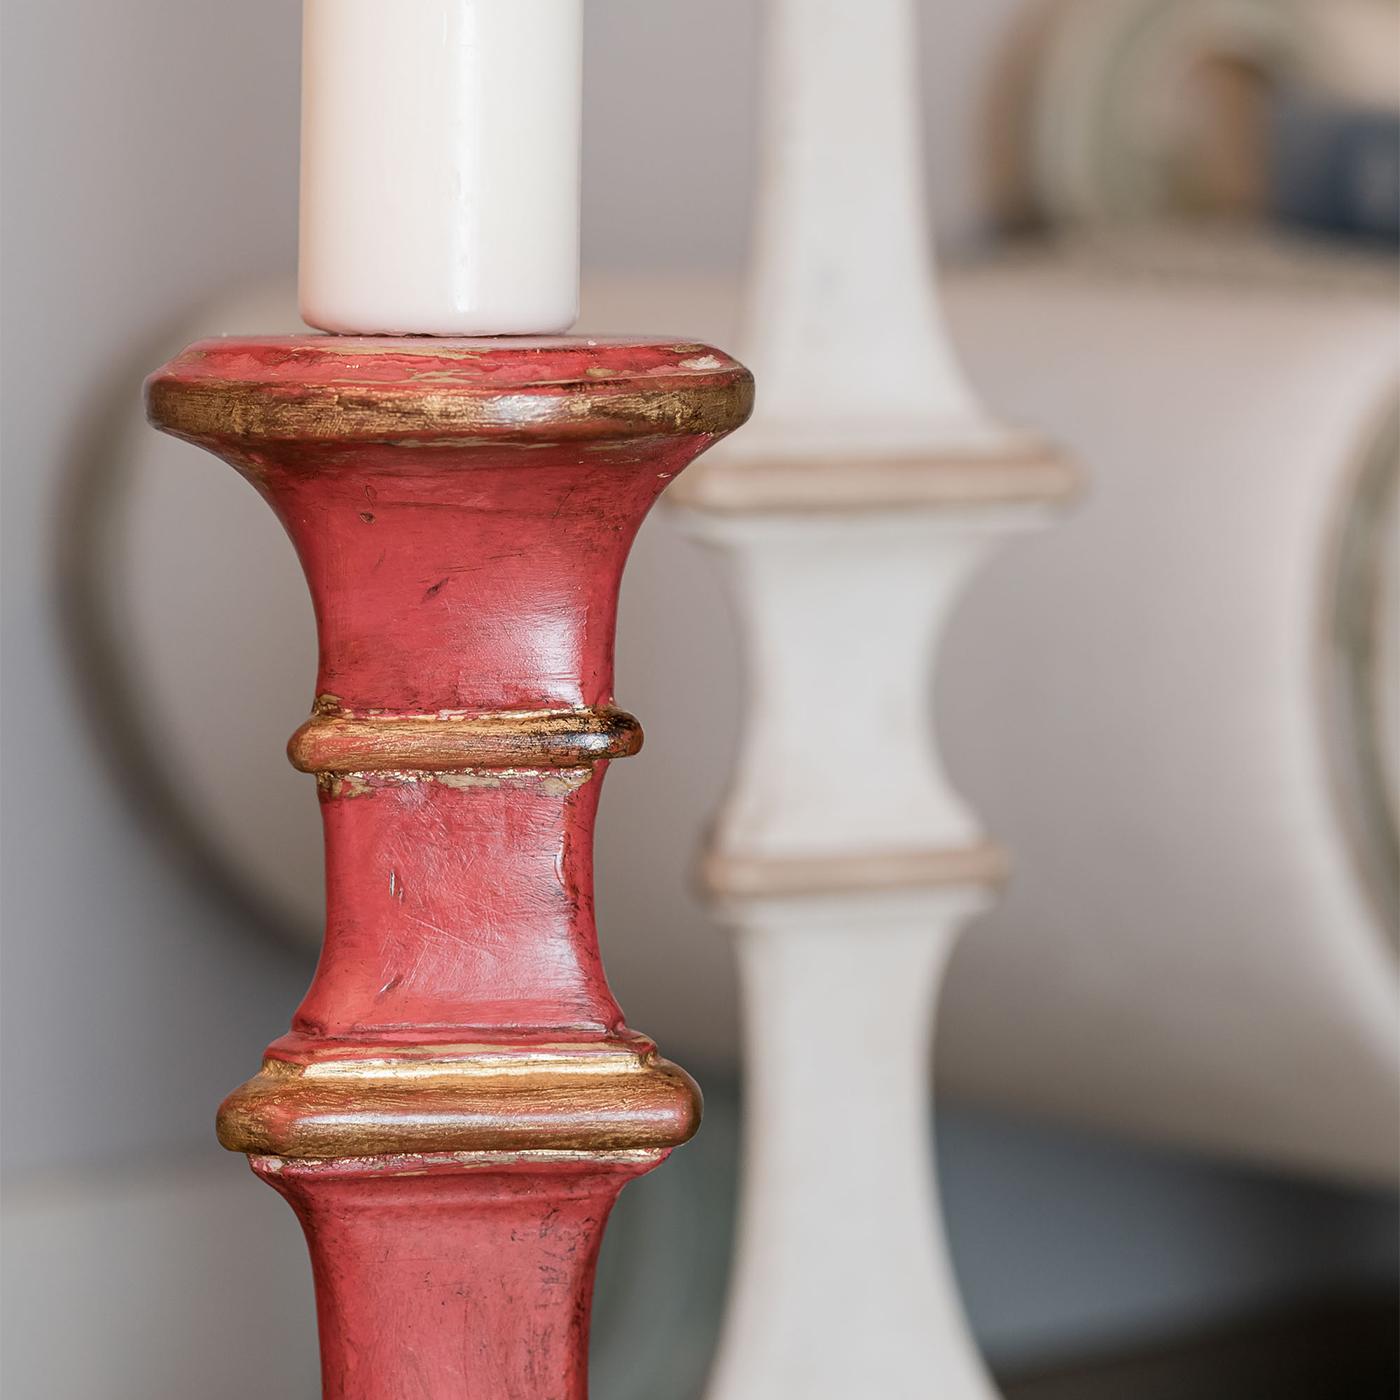 Introducing a small Gubbio candle holder, an homage to the timeless Venetian style. Reminiscent of a bygone era when candles and oil lamps illuminated the night, this piece captures the essence of traditional craftsmanship. For those seeking modern